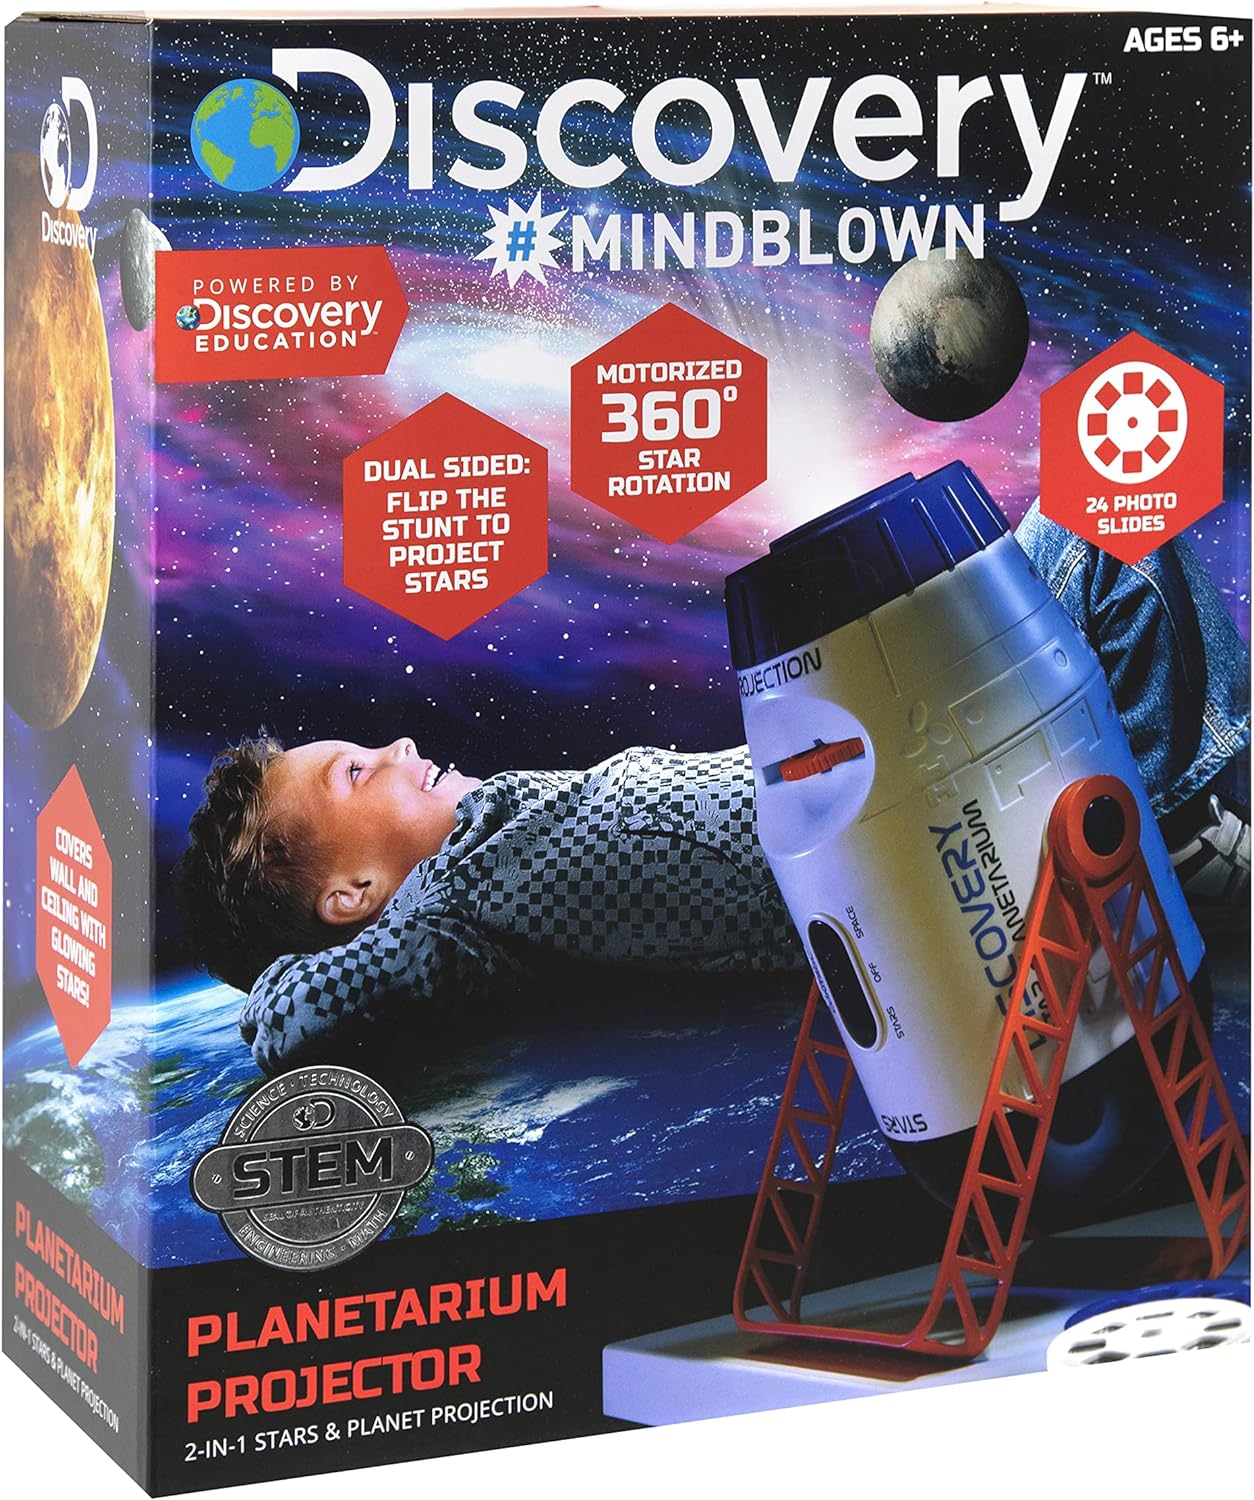 Discover the Universe at Home: A Review of the Discovery 1423000801 Mindblown Planetarium Projector